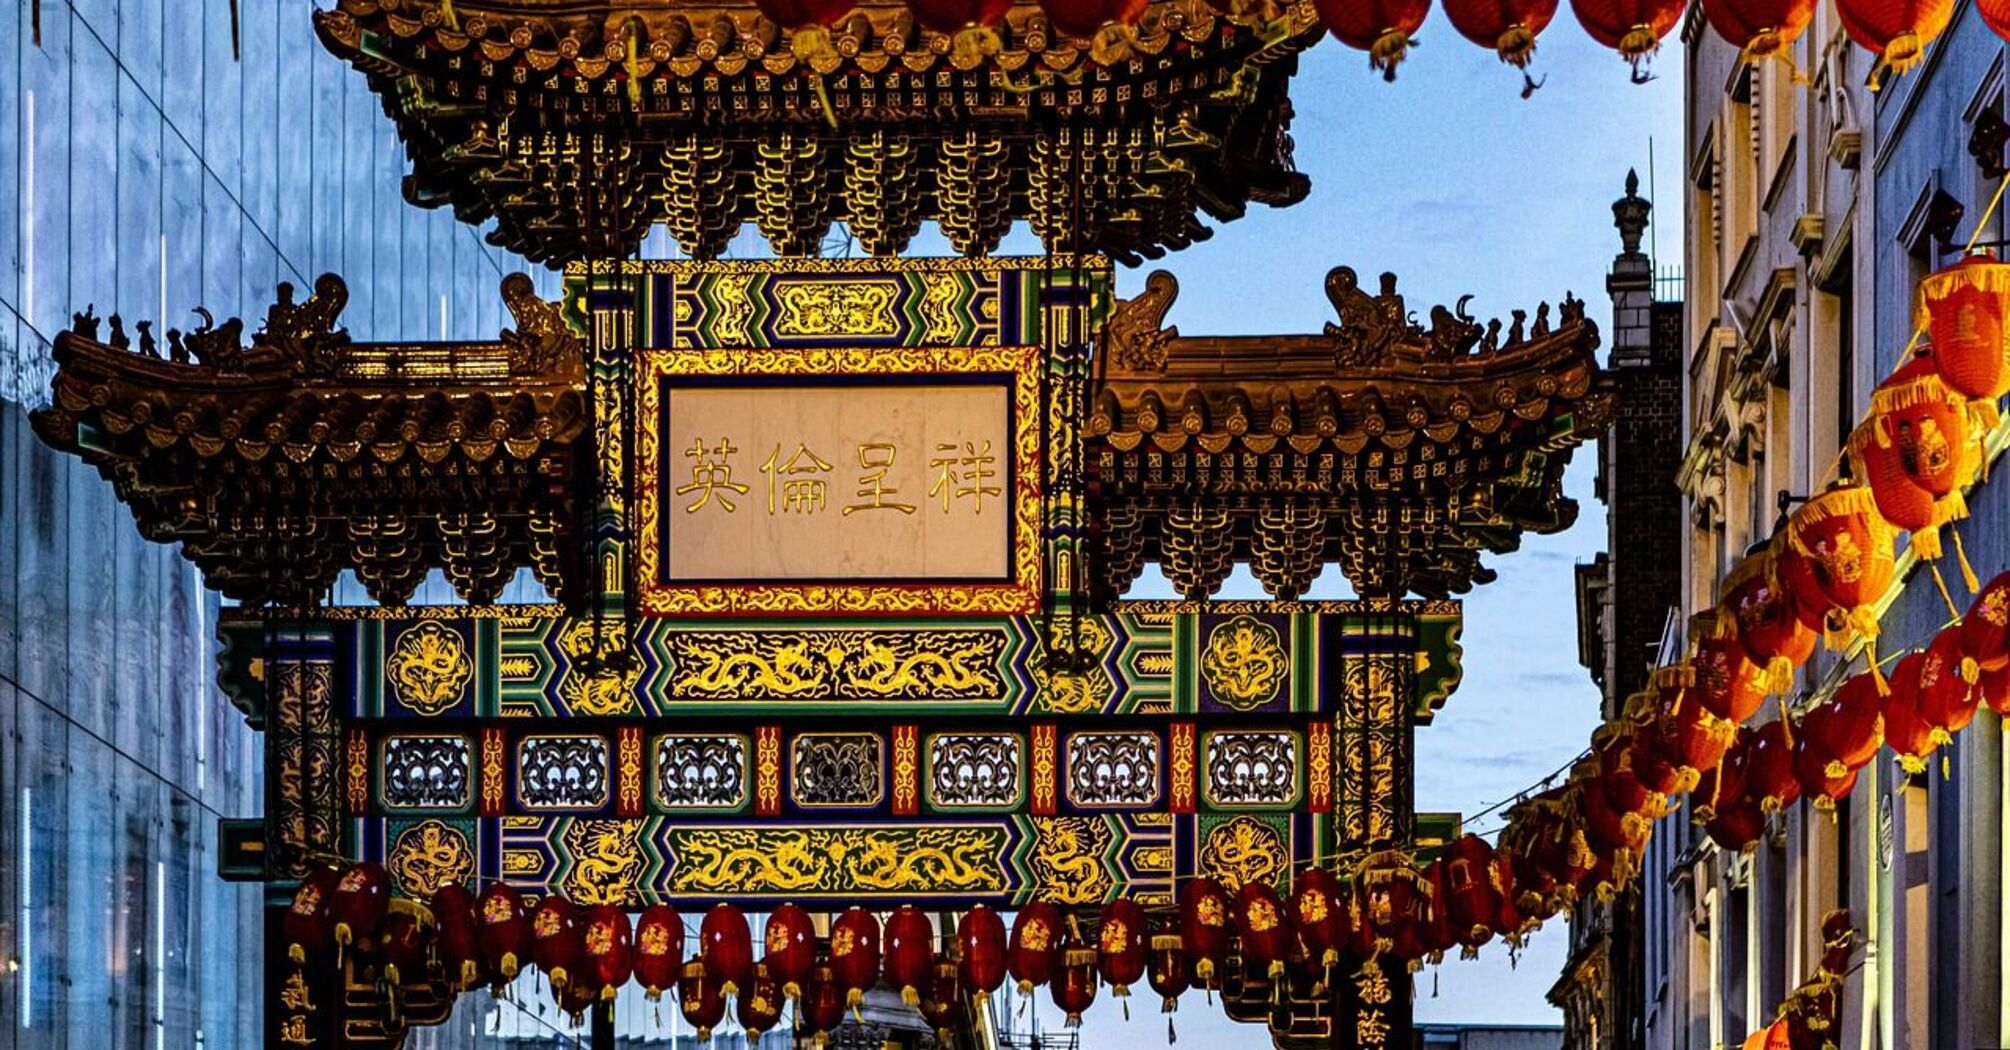 London is home to one of the largest Chinatowns in the world